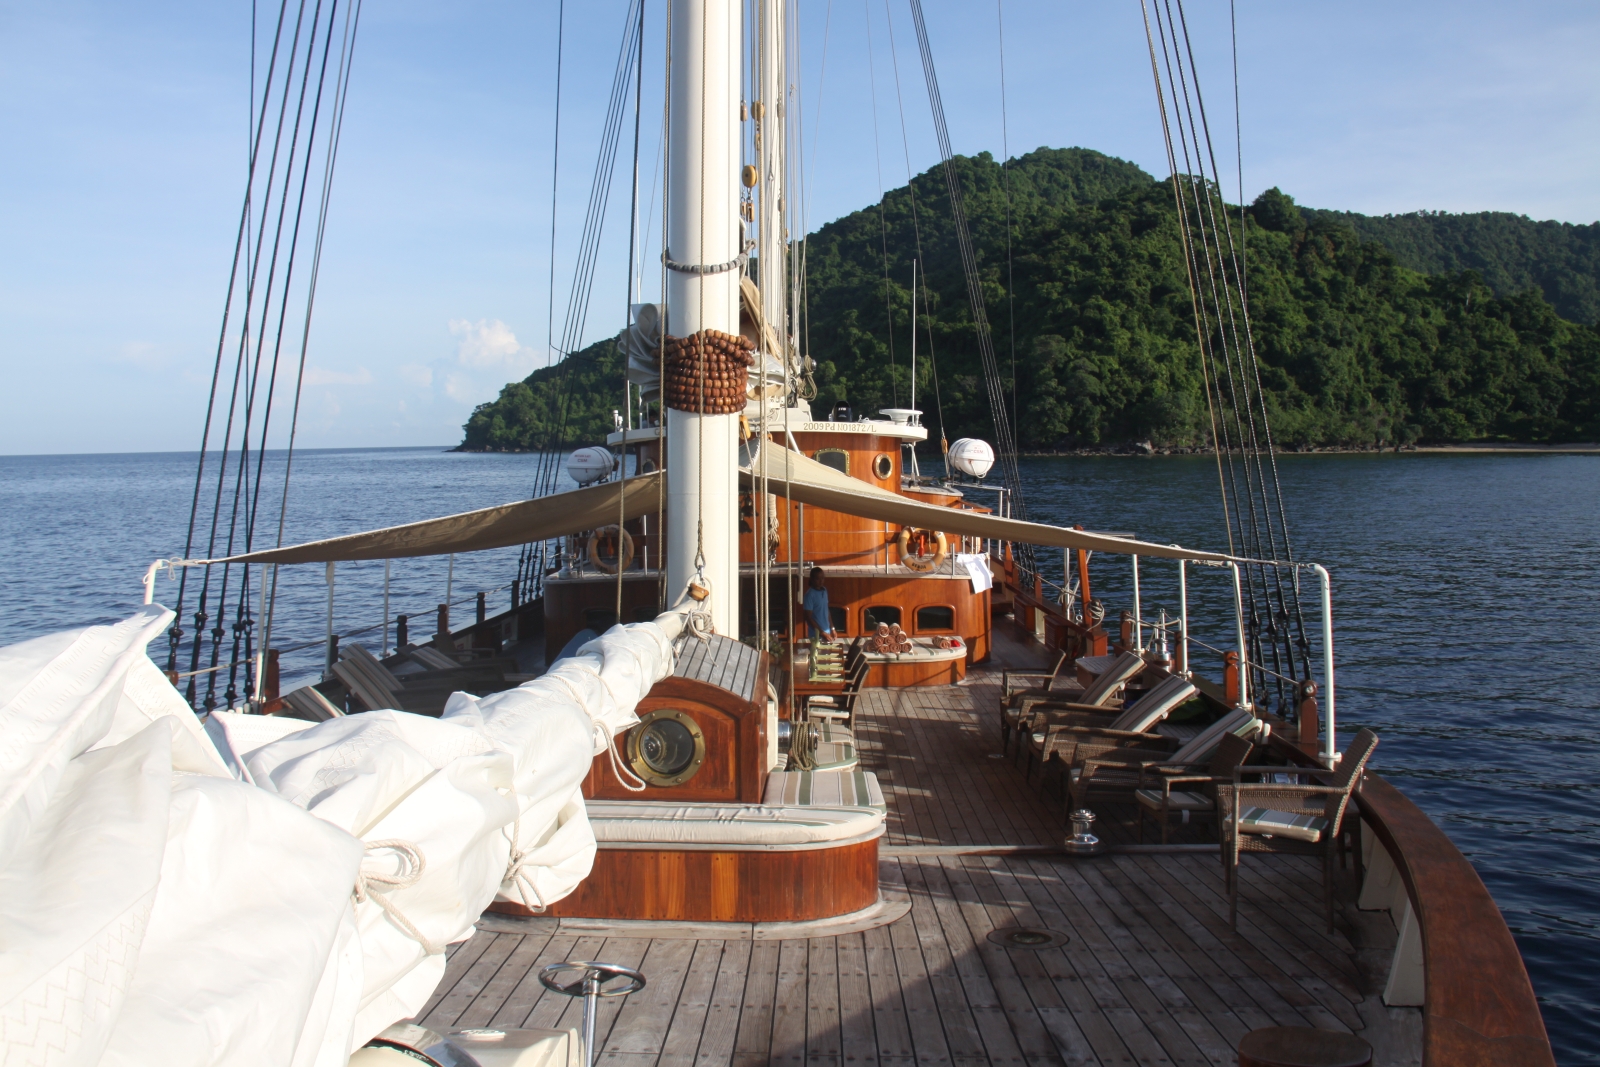 View of the deck and towards an island